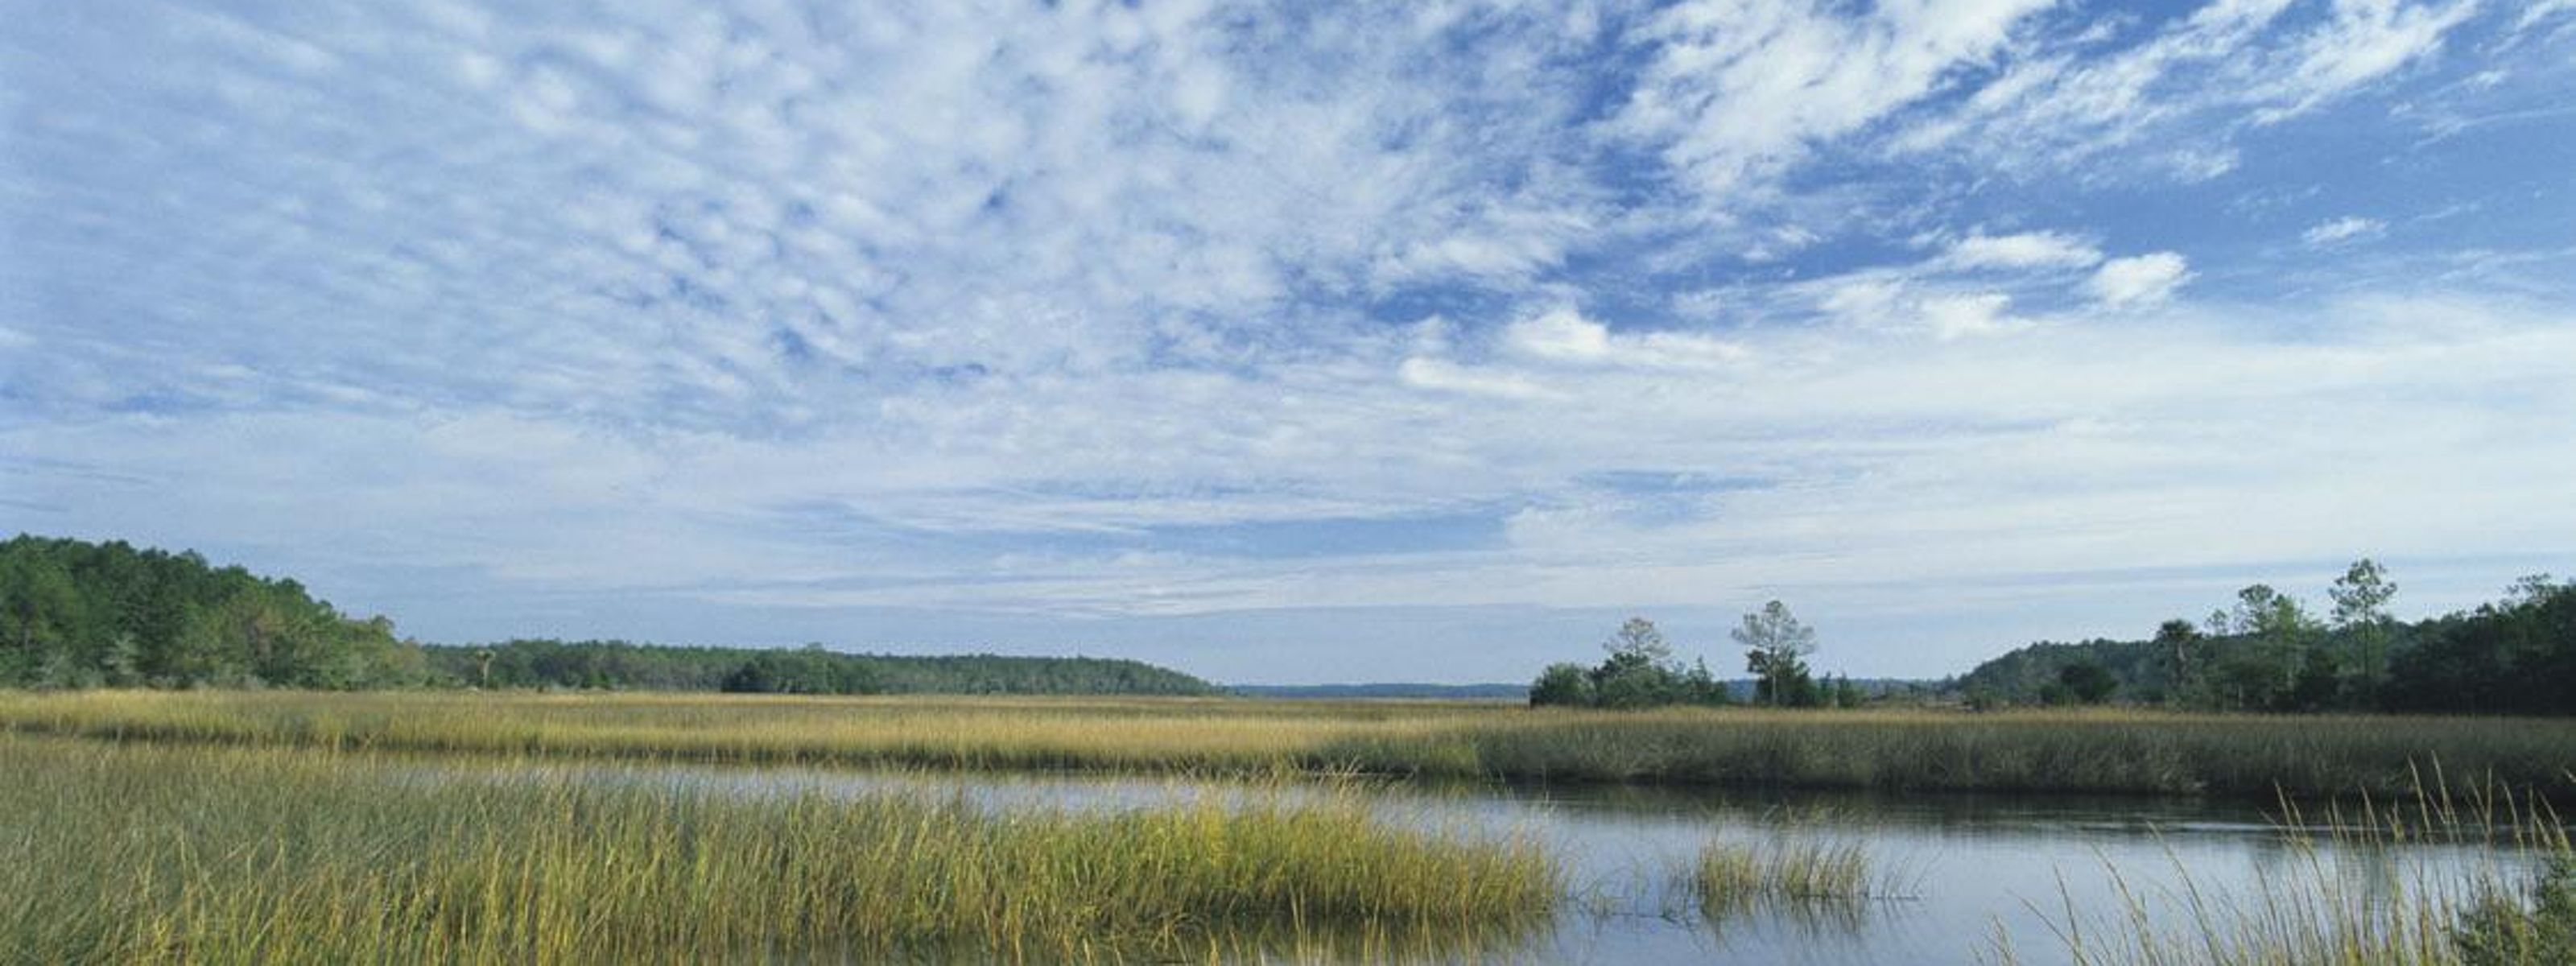 An area of open, grassy marshland with water meandering through it and a blue sky overhead.